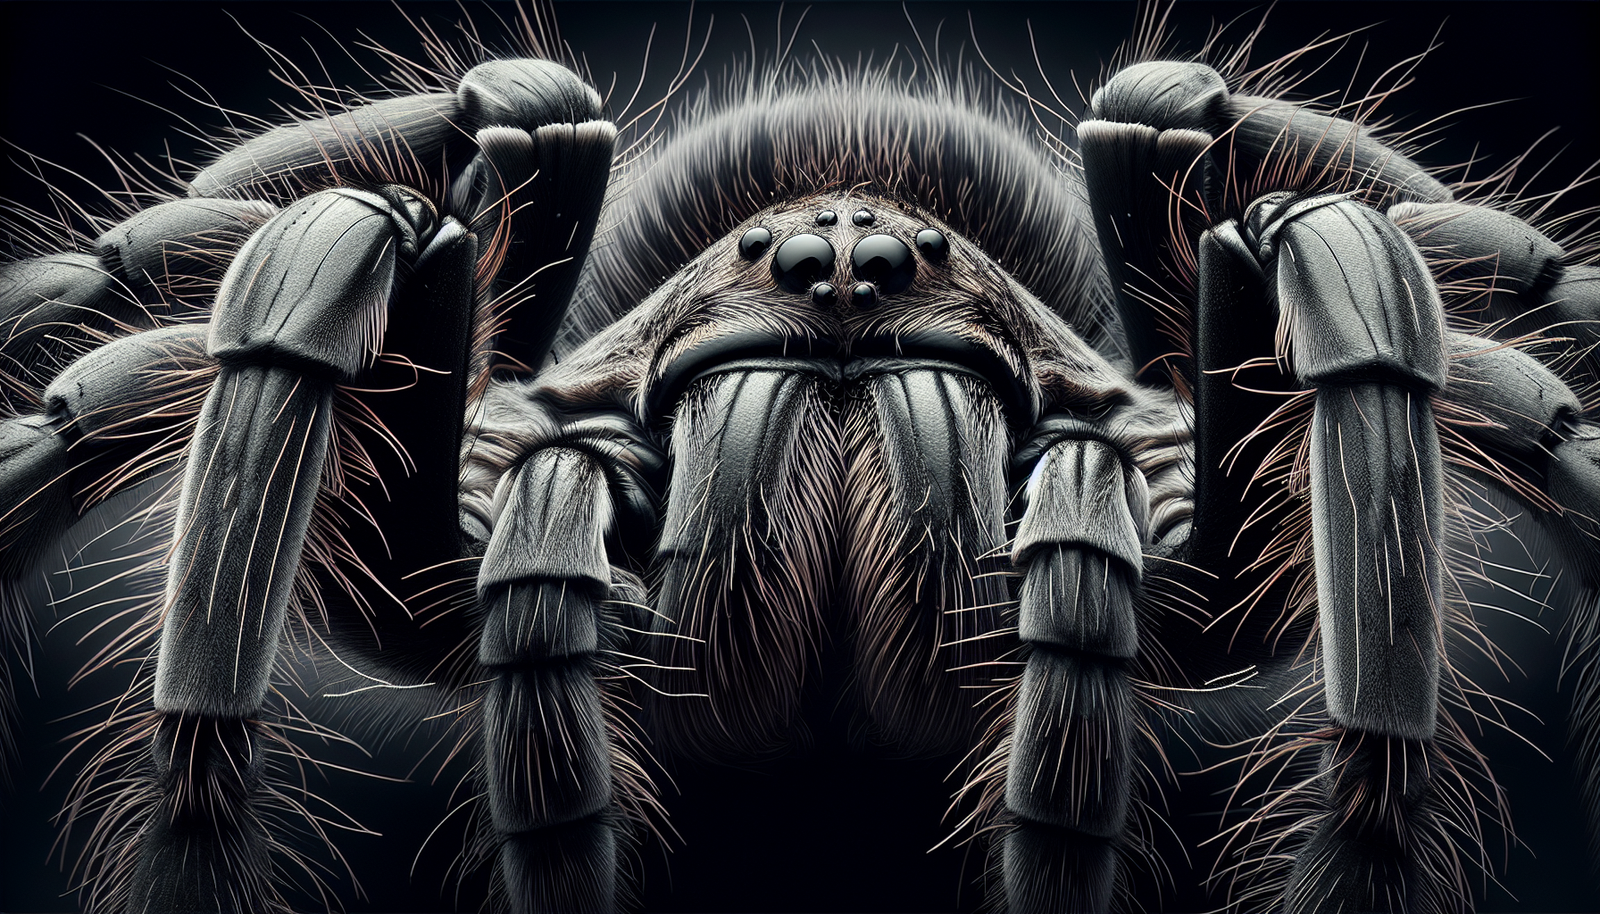 How Do Tarantulas Cope With Threats From Large Predatory Insects?